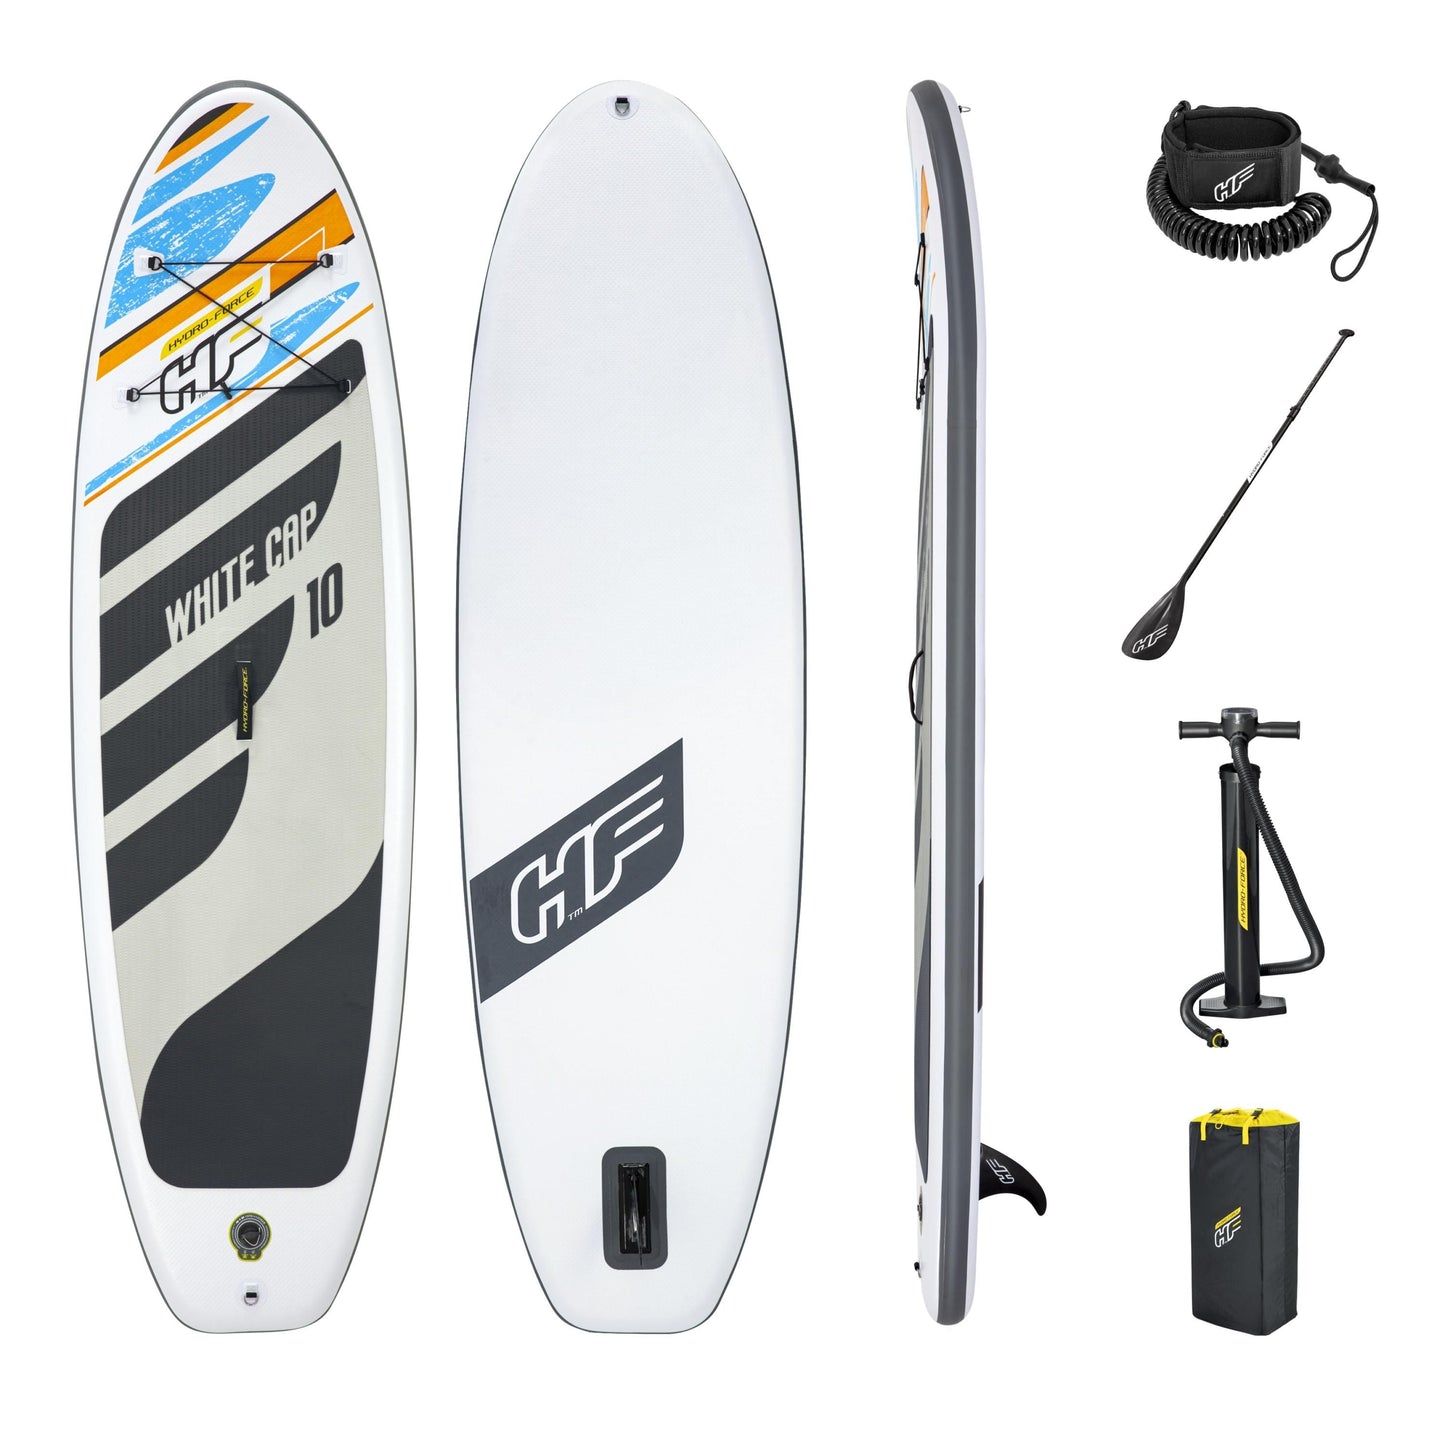 Bestway Hydro-Force White Cap 10 pies SUP inflable Stand Up Paddle Board revisión